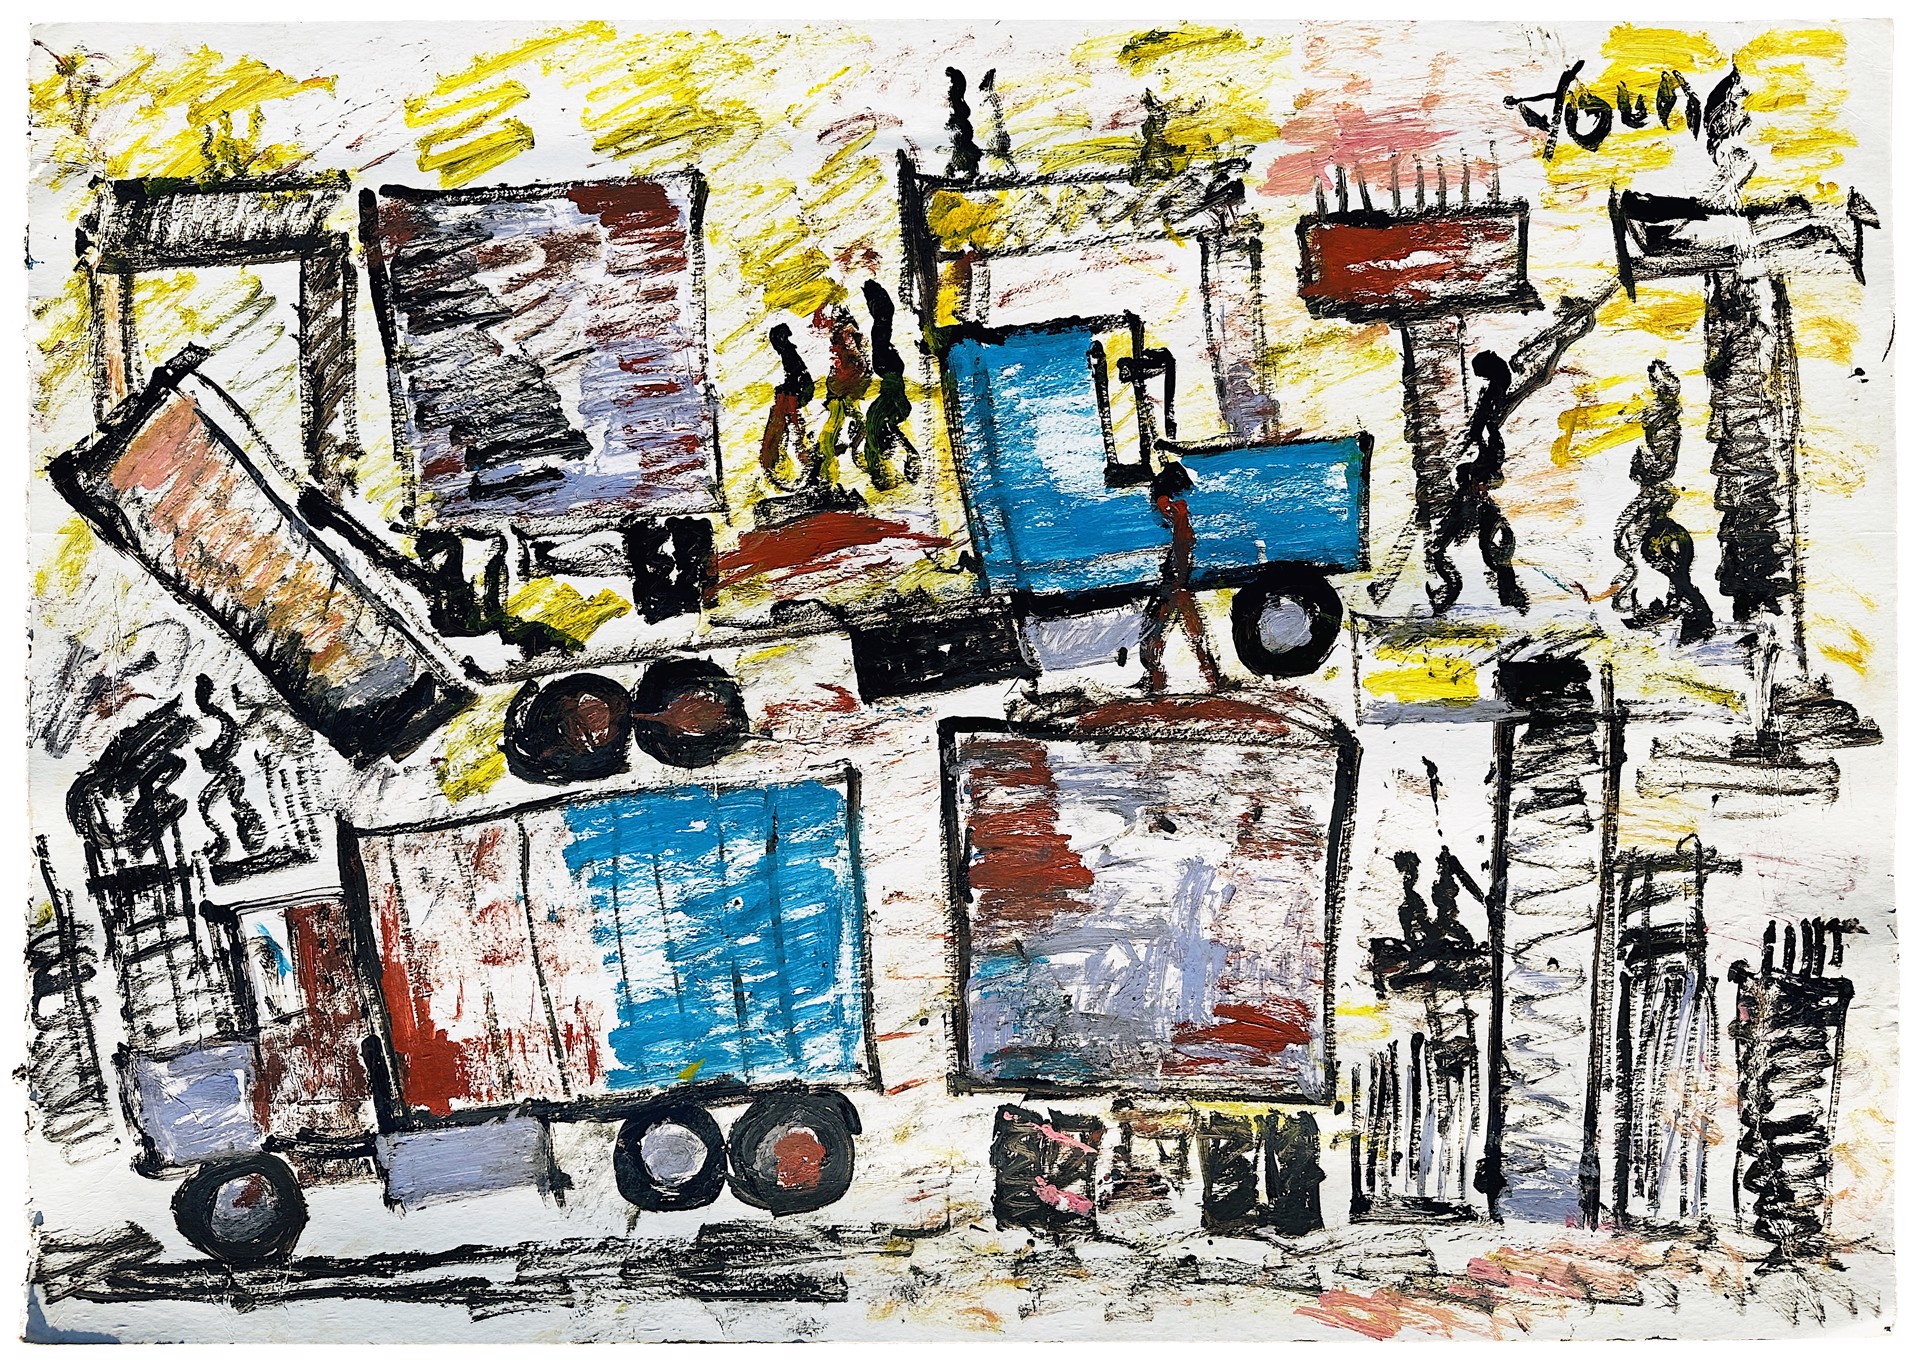 Untitled (Urban Construction Scene) by Purvis Young